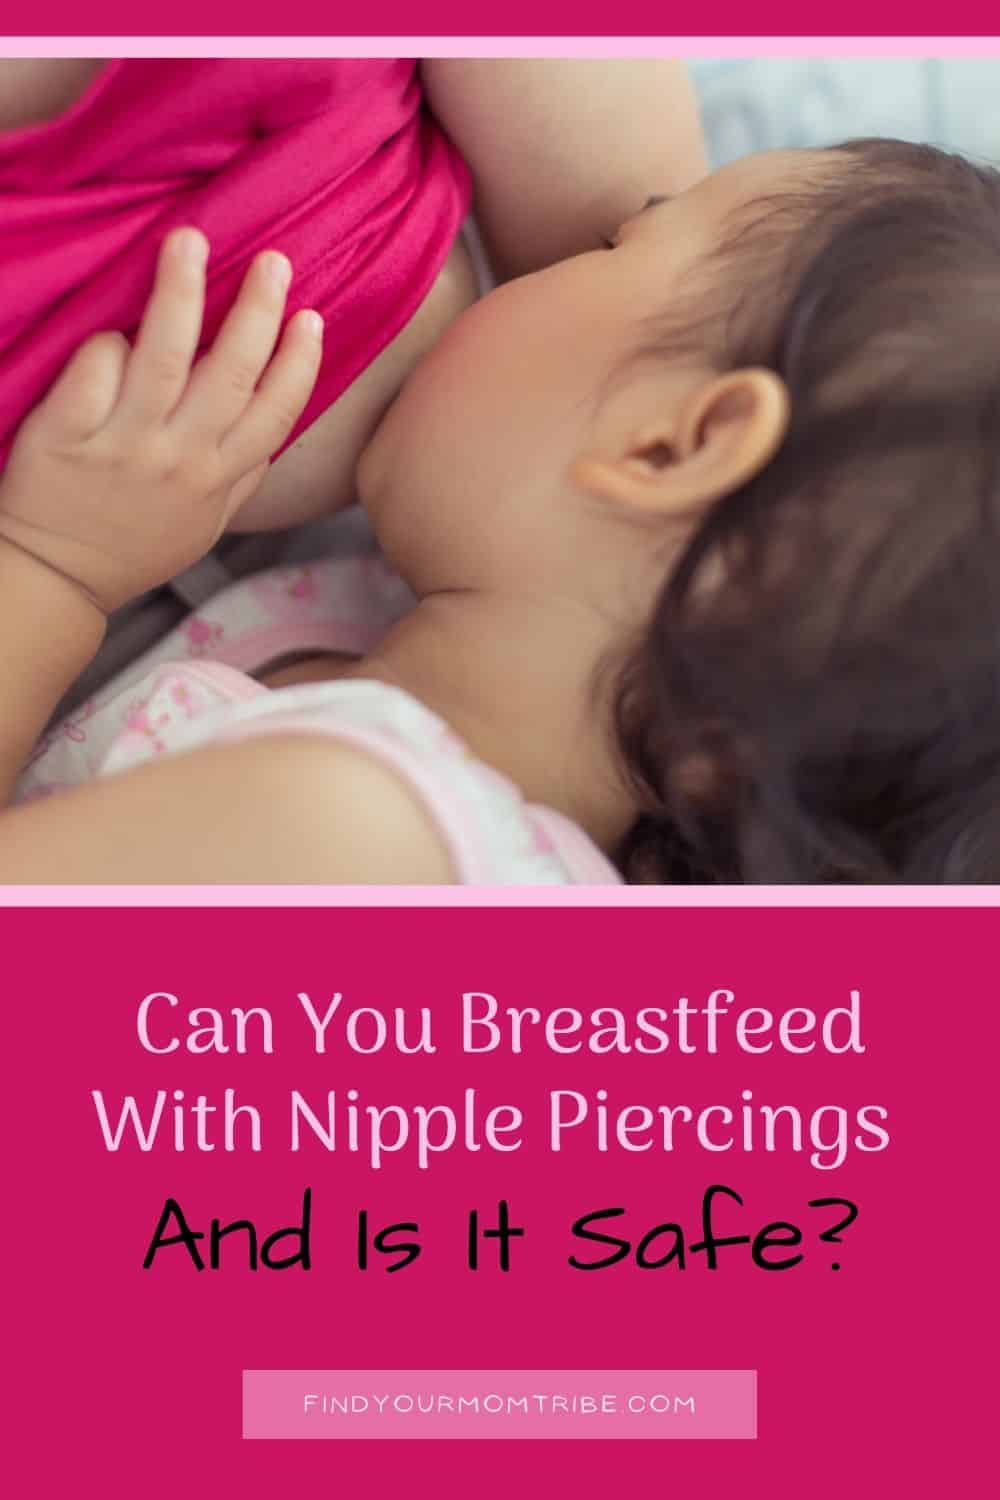 Can You Breastfeed With Nipple Piercings And Is It Safe